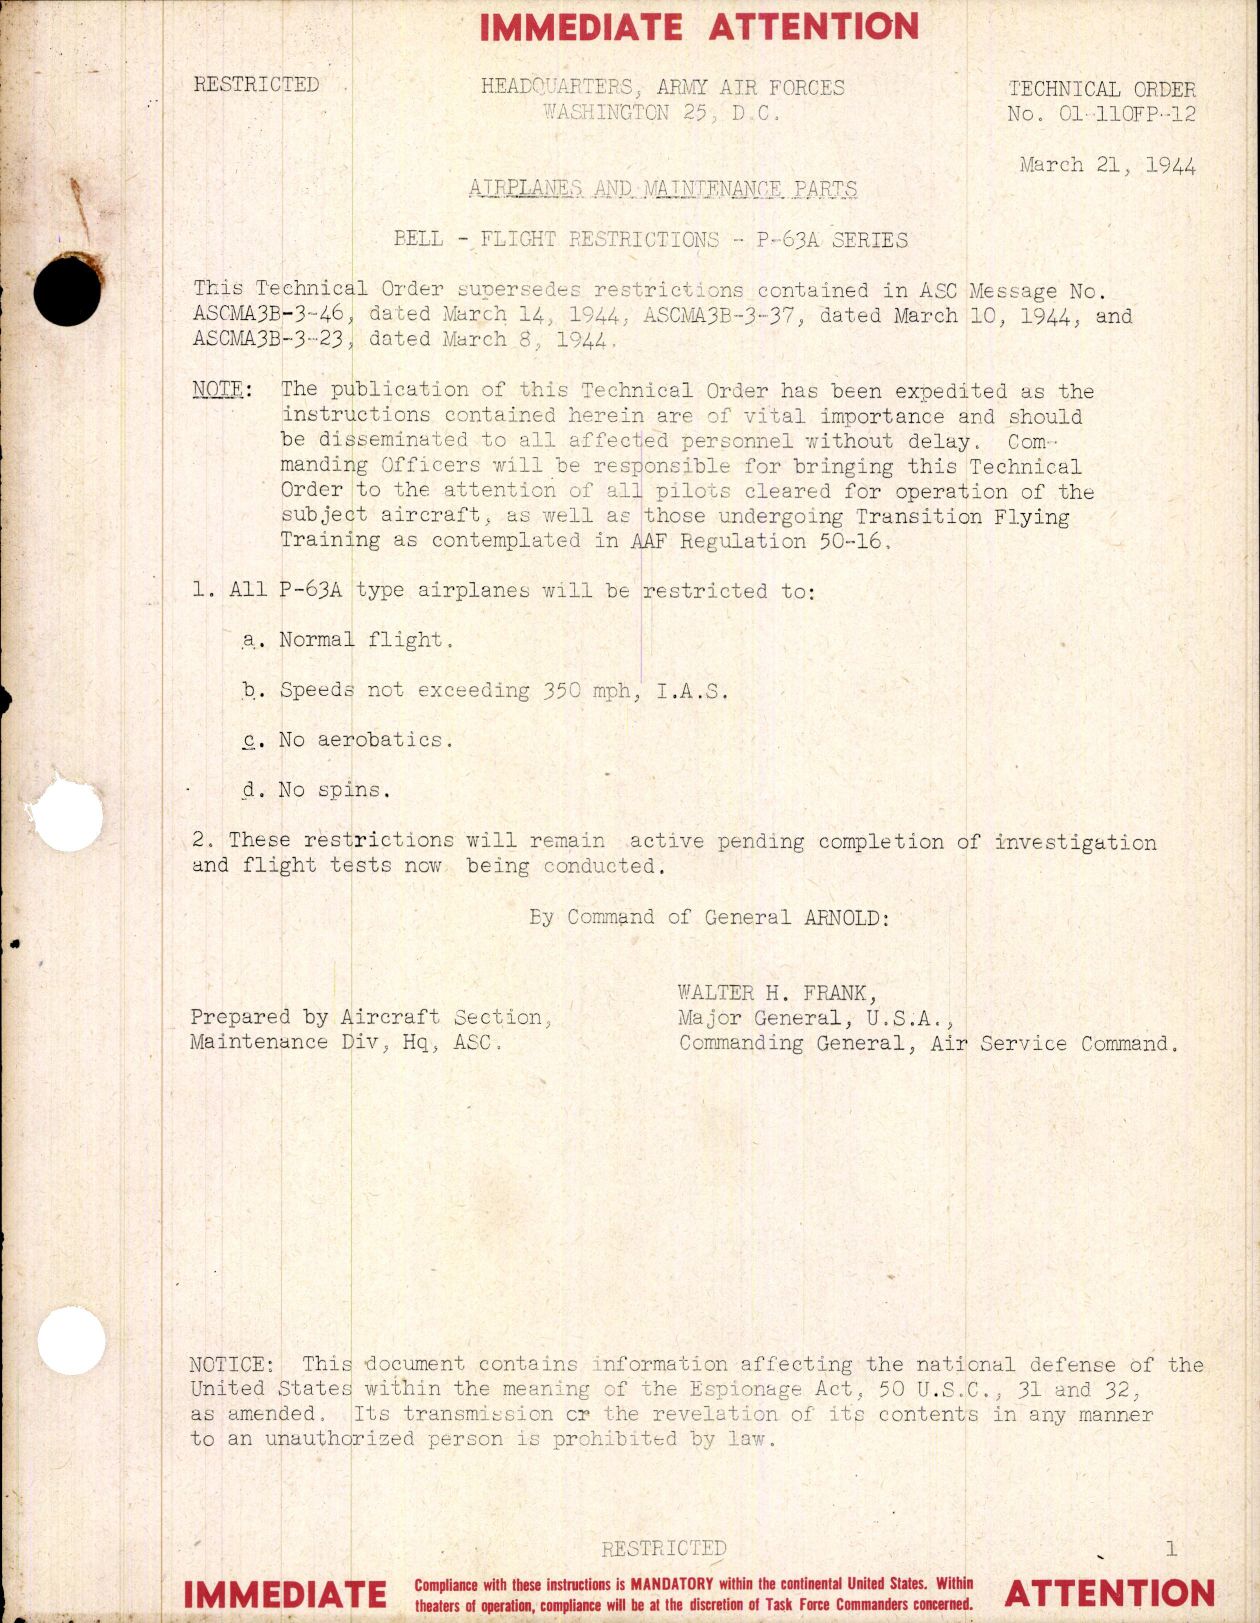 Sample page 1 from AirCorps Library document: Flight Restrictions for P-63A Series